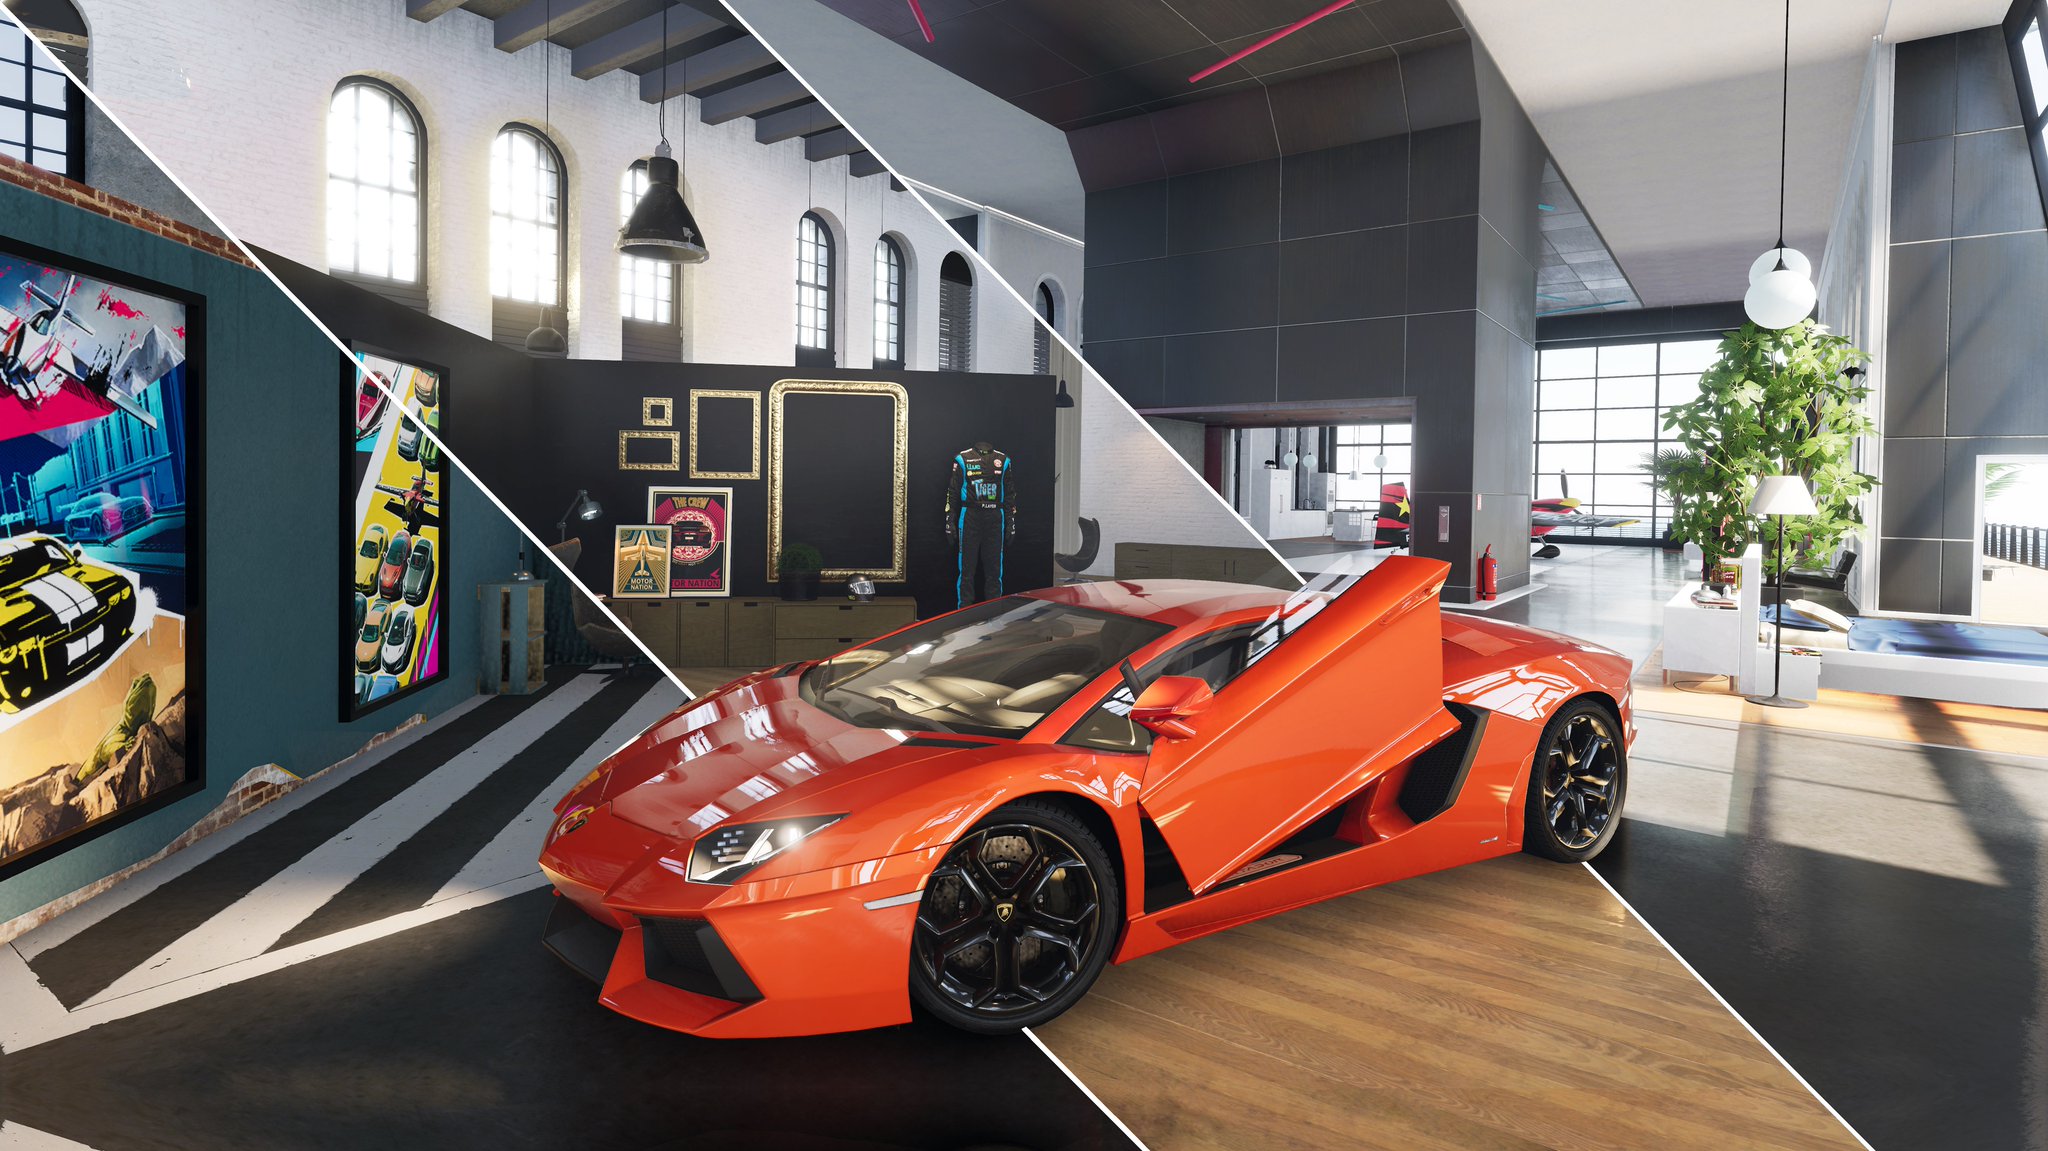 The Crew 2 Features Apartment Spaces, In-Depth Customization and